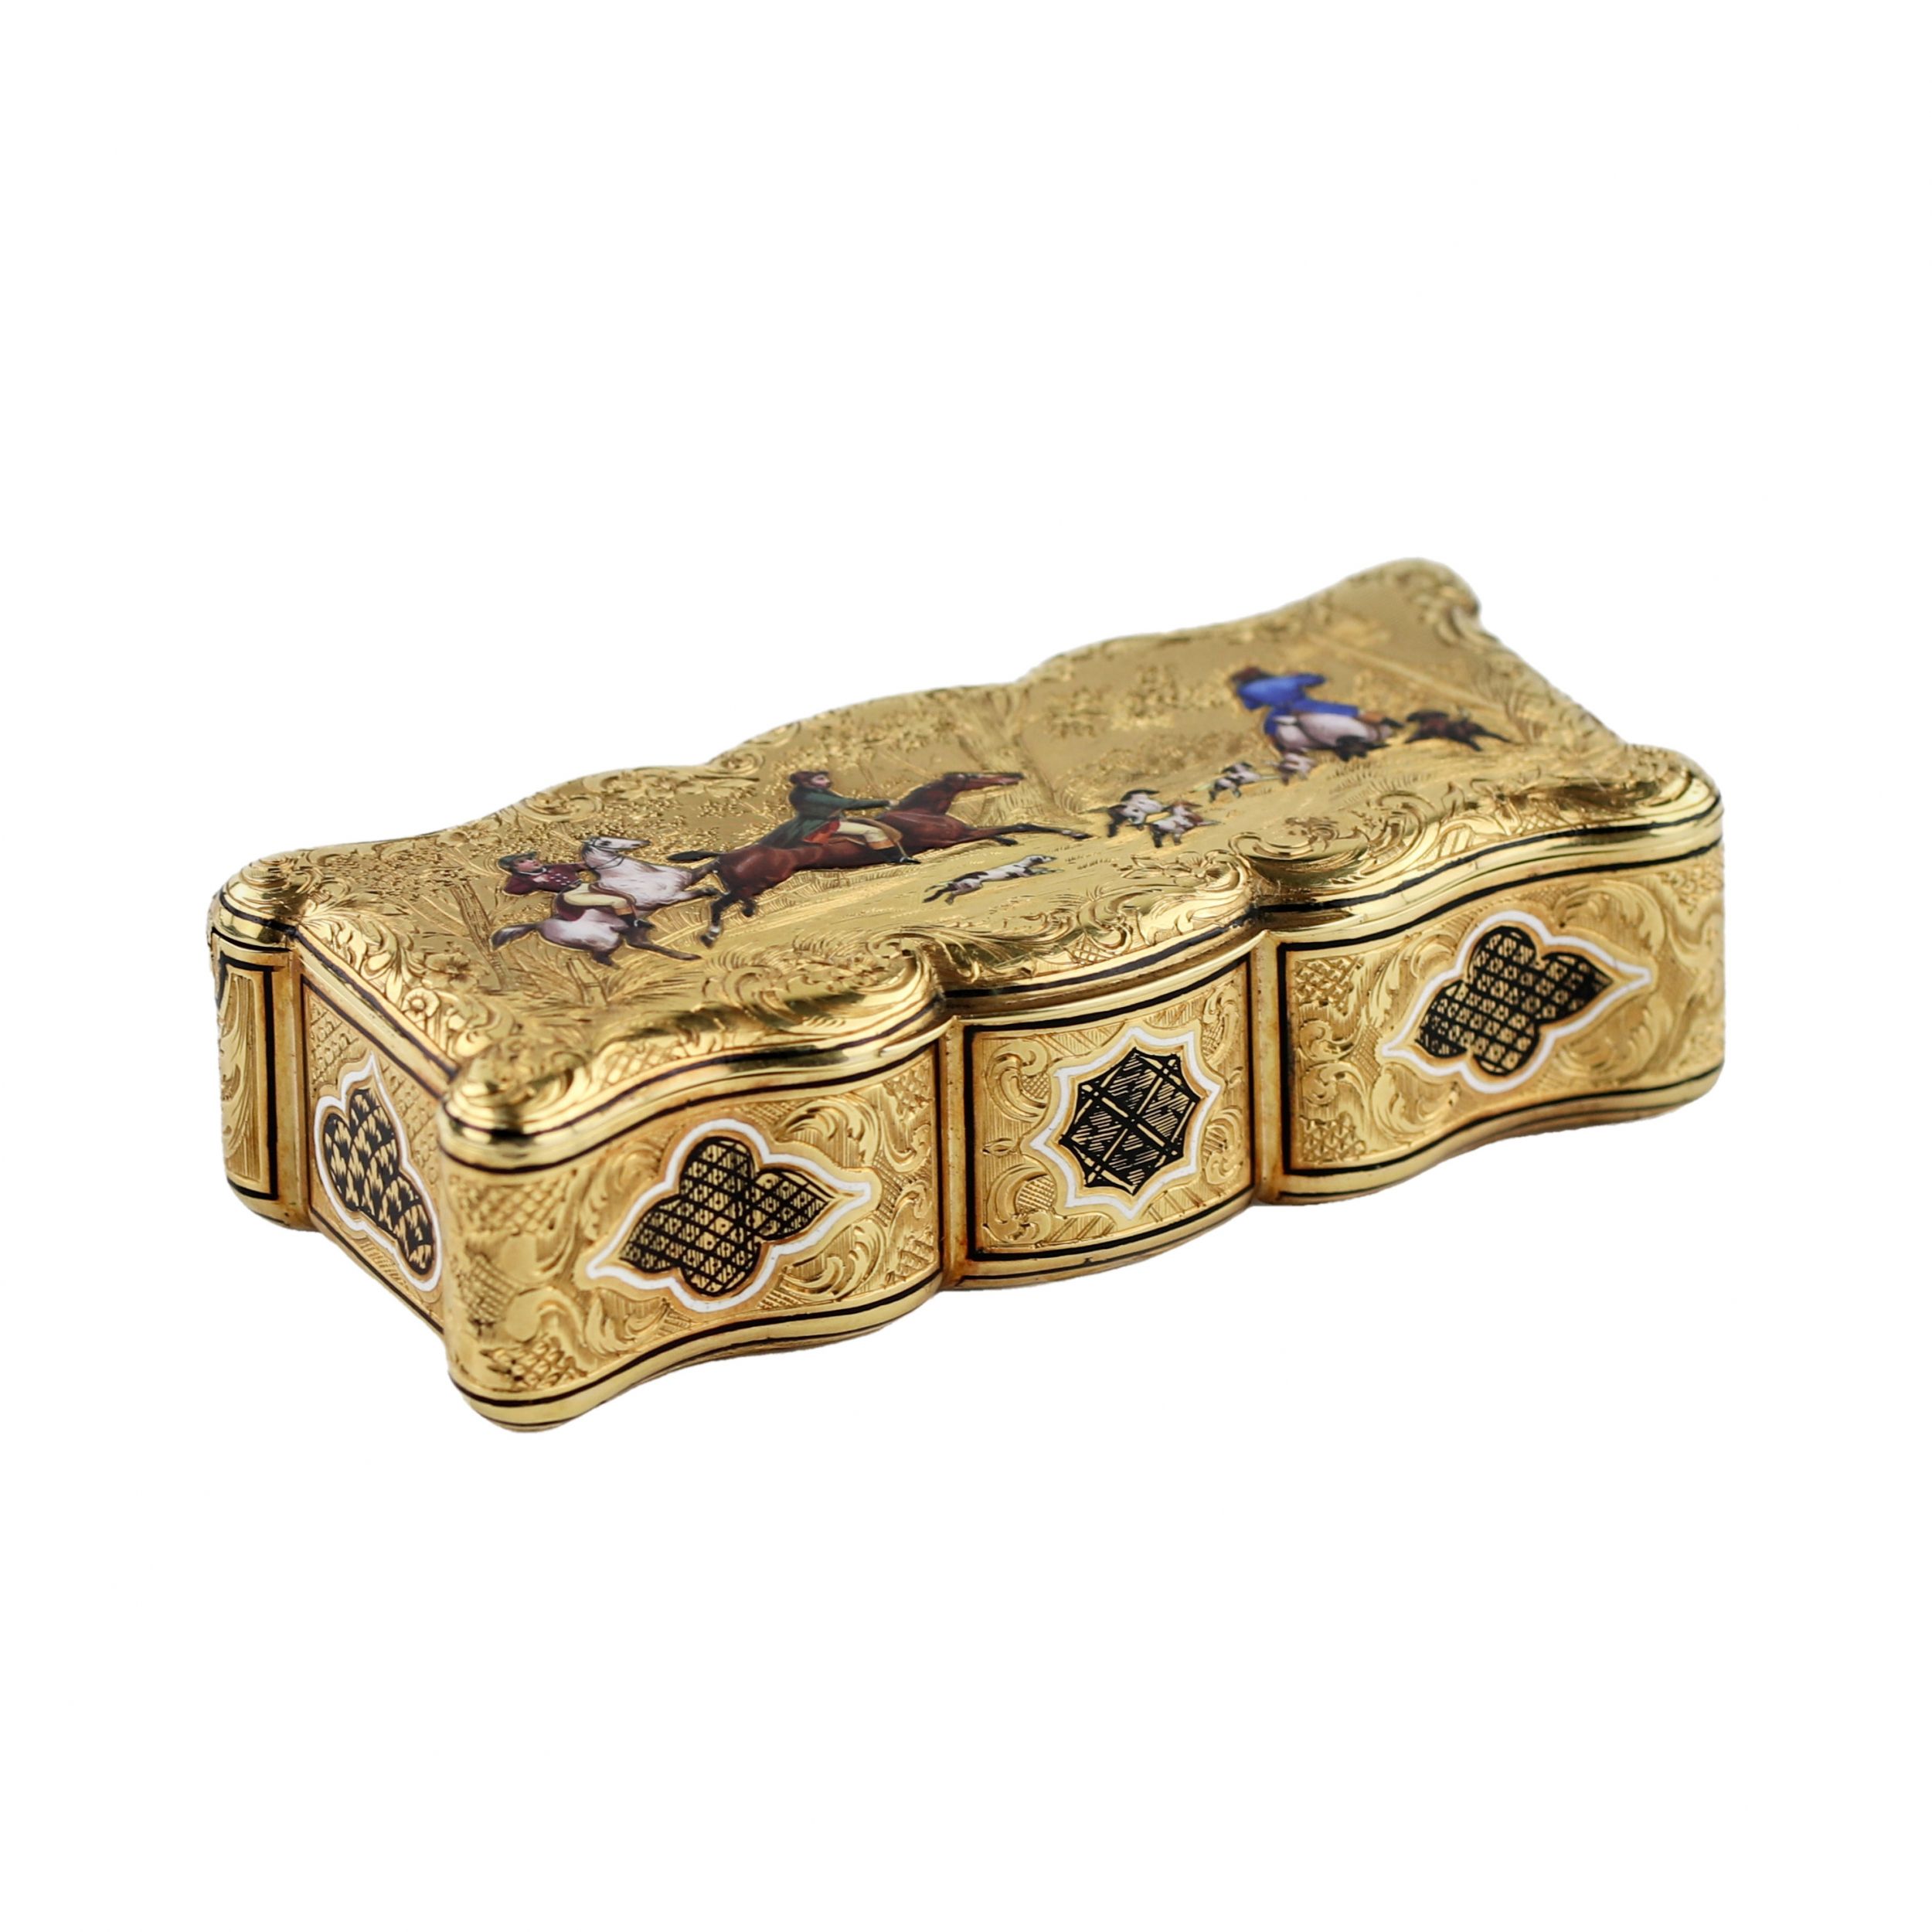 18K-gold-enameled-snuffbox-French-work-of-the-19th-century-with-scenes-of-equestrian-hunting-